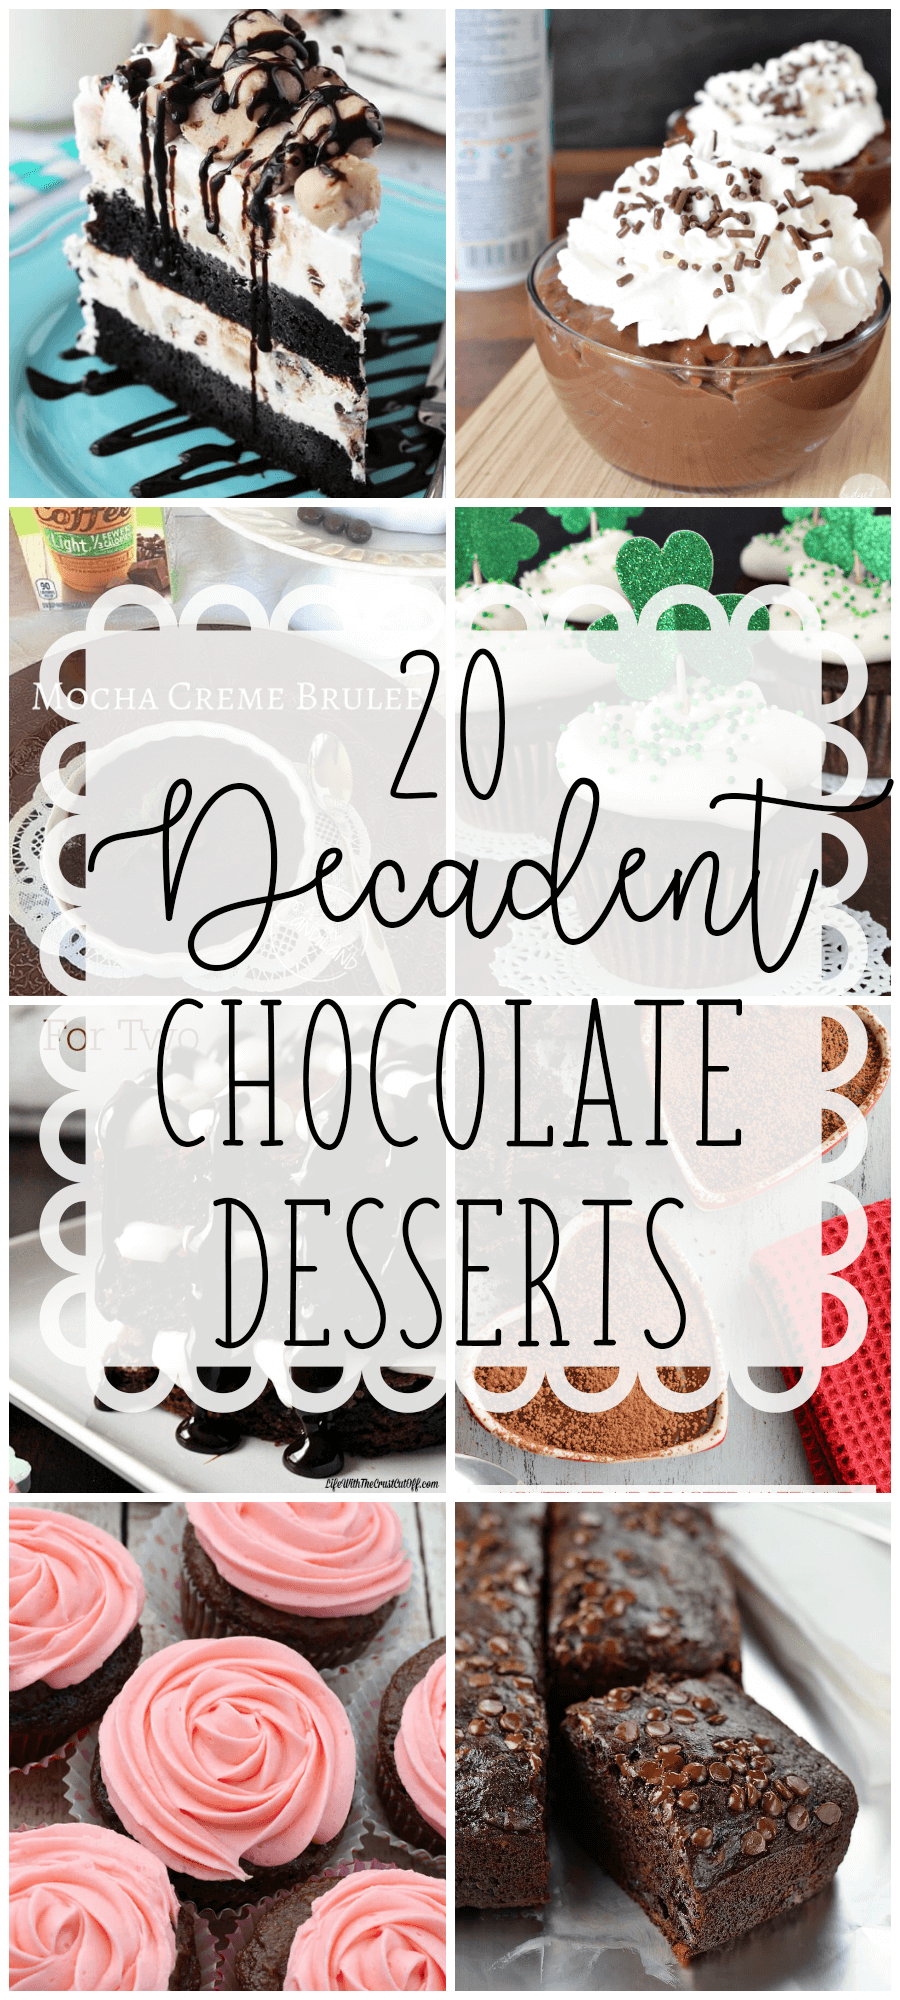 If you're looking for a chocolate dessert, but aren't sure what, stop looking. Here are 20 decadent chocolate desserts, varying in type and ease, that should hit the spot.